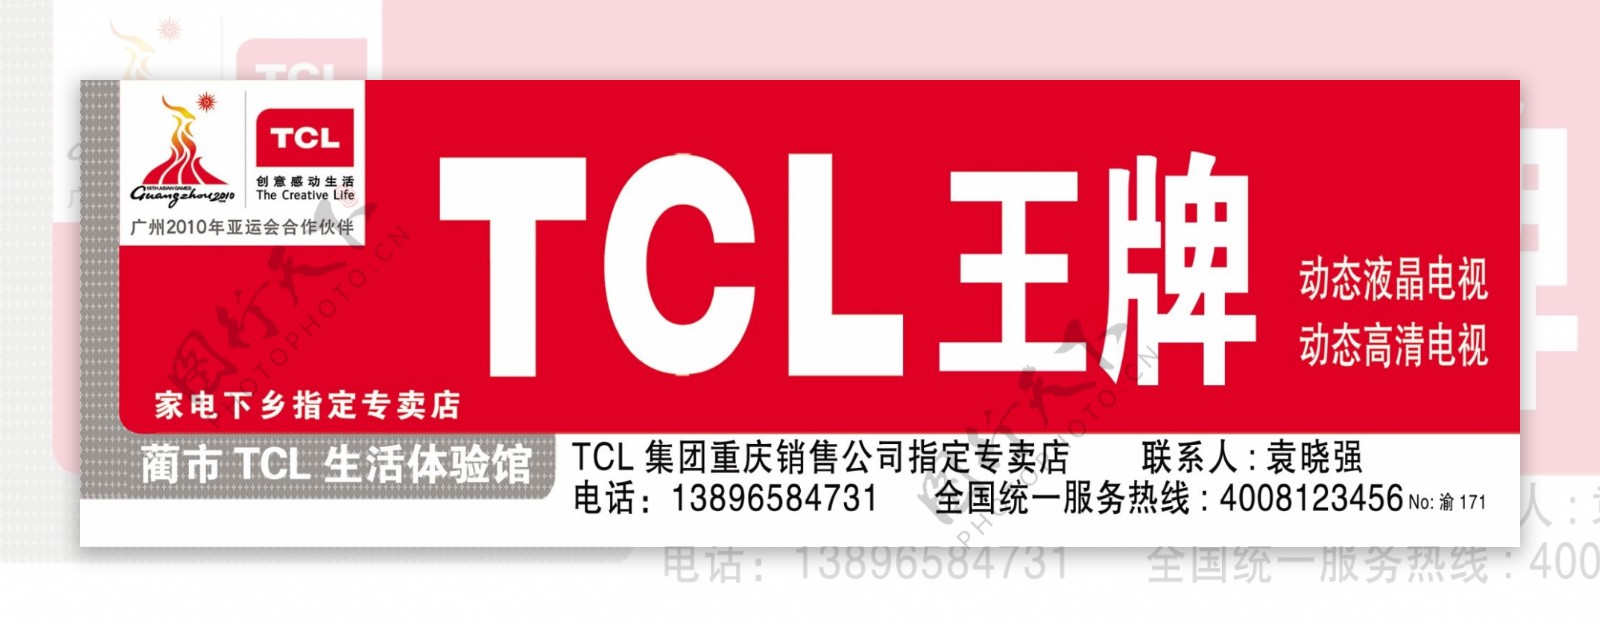 TCL门头图片